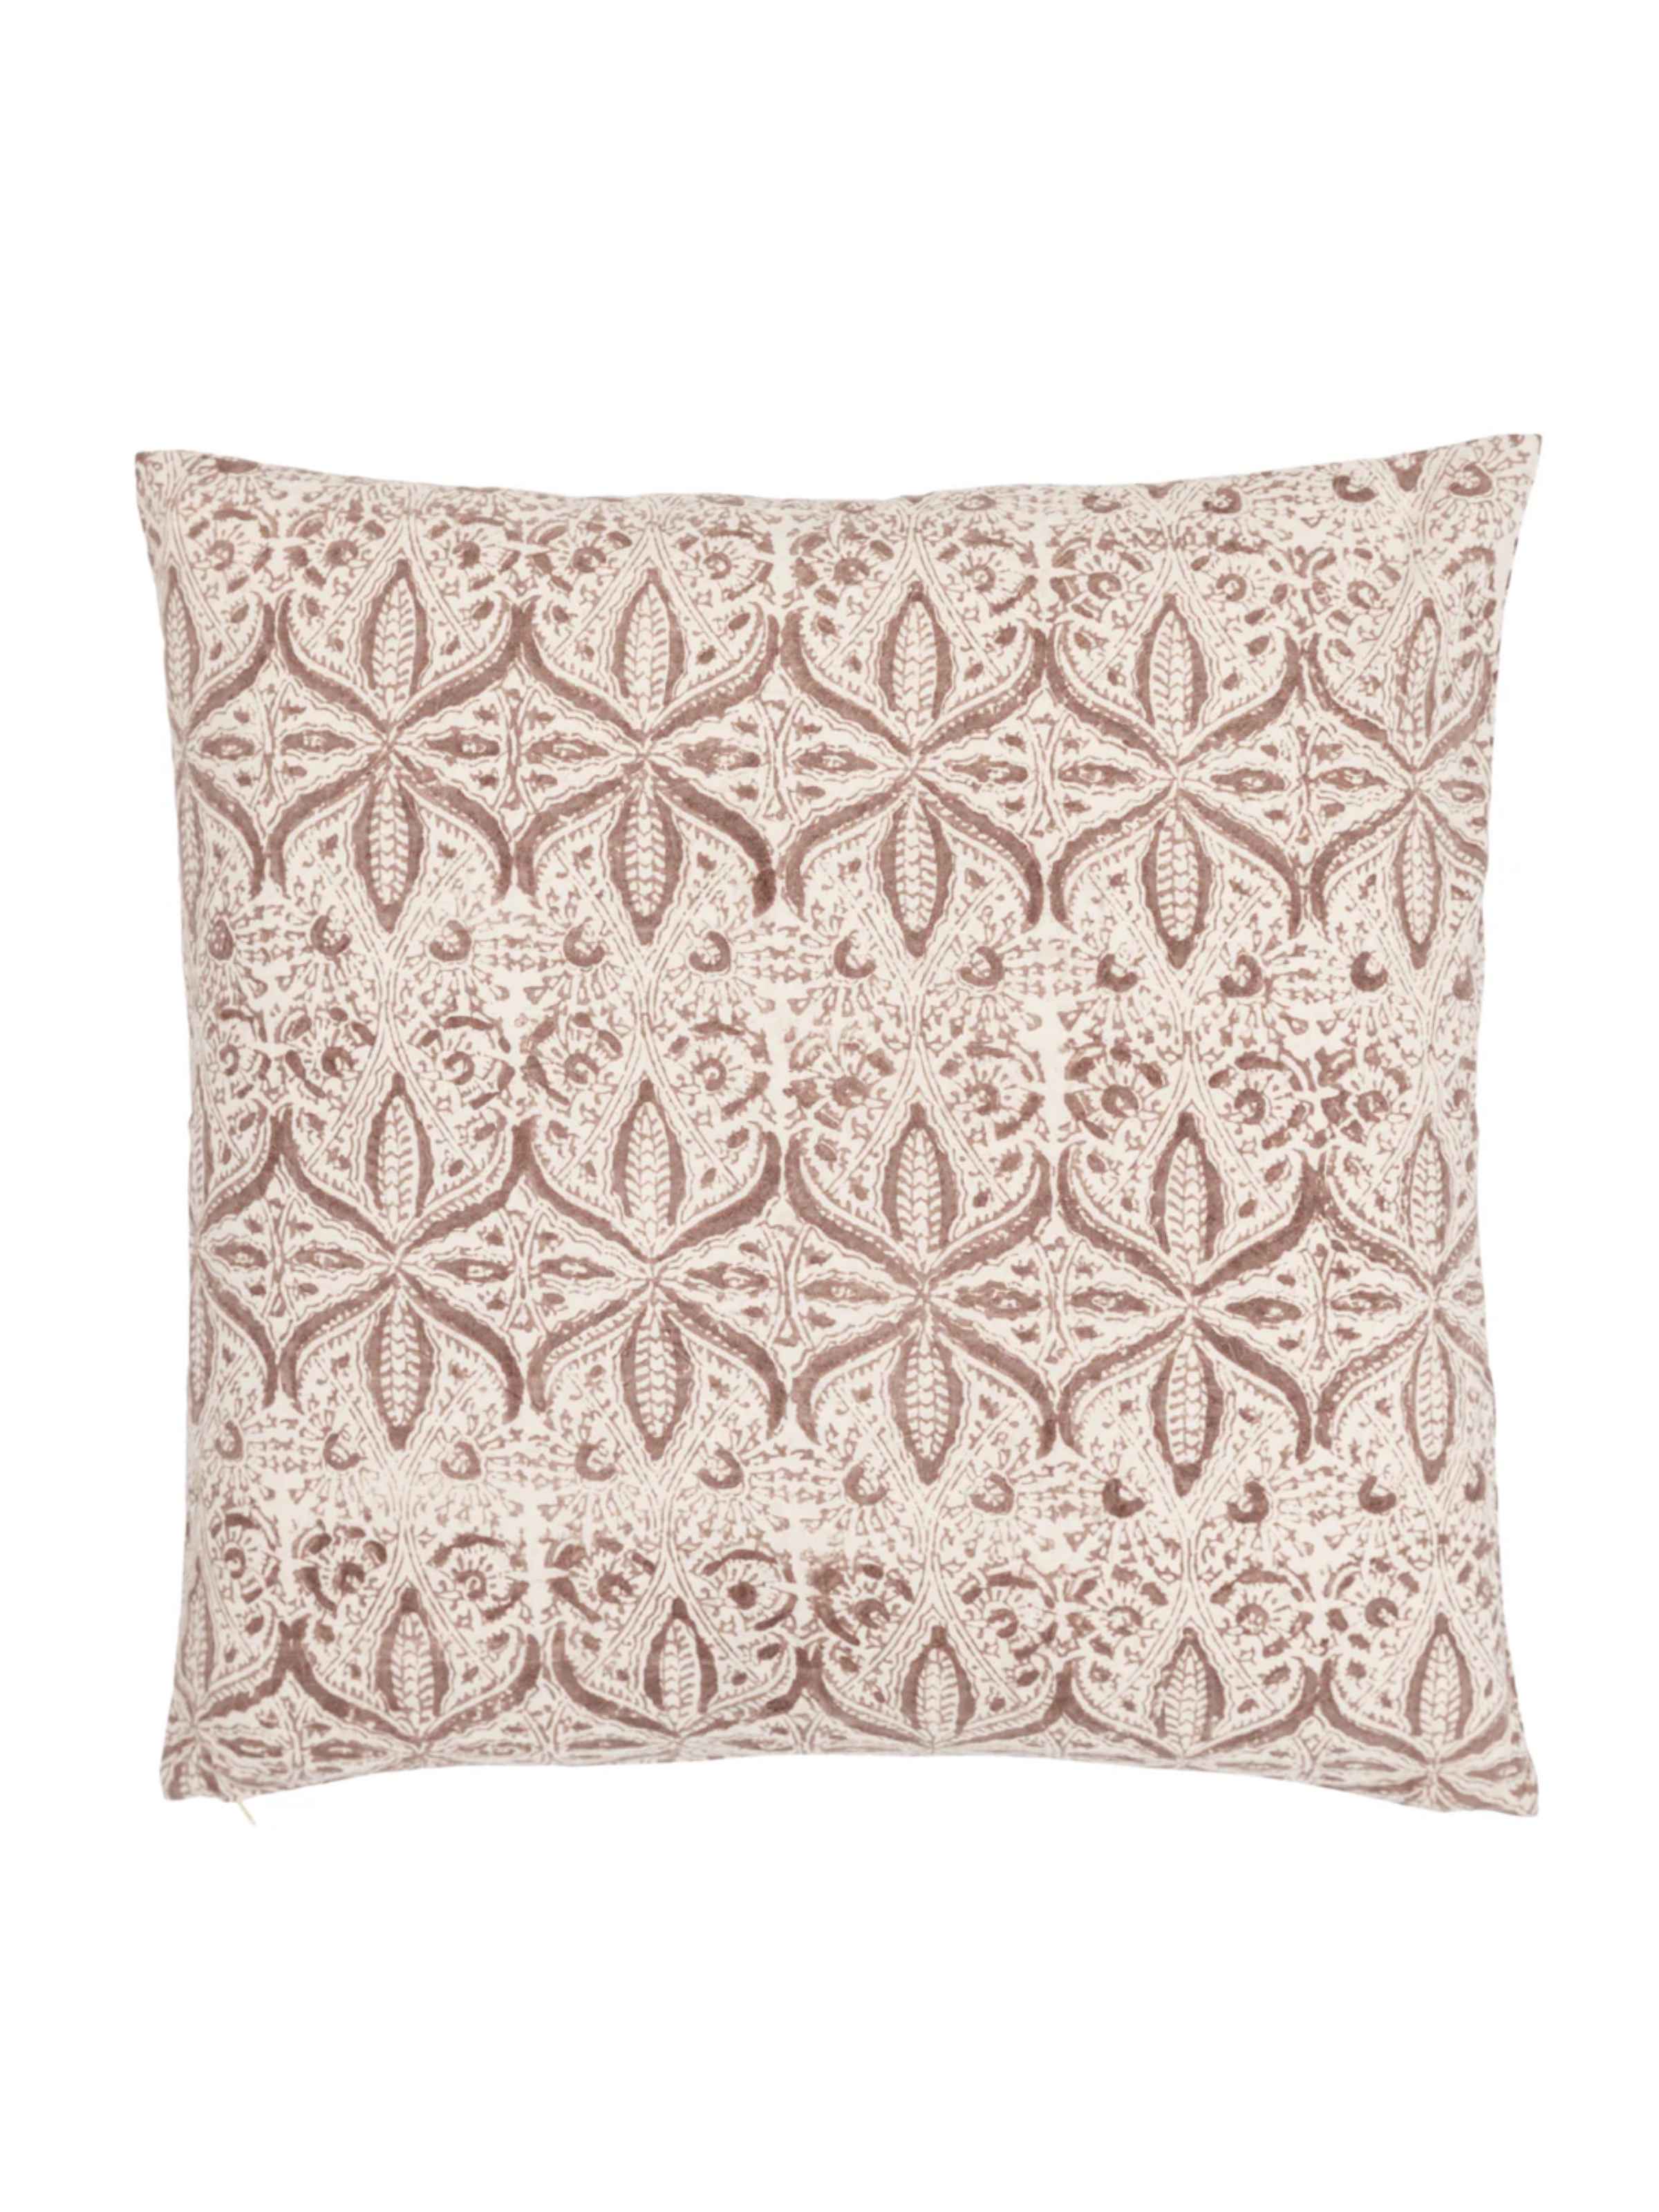 Jali Clay Decorative Pillow Cover